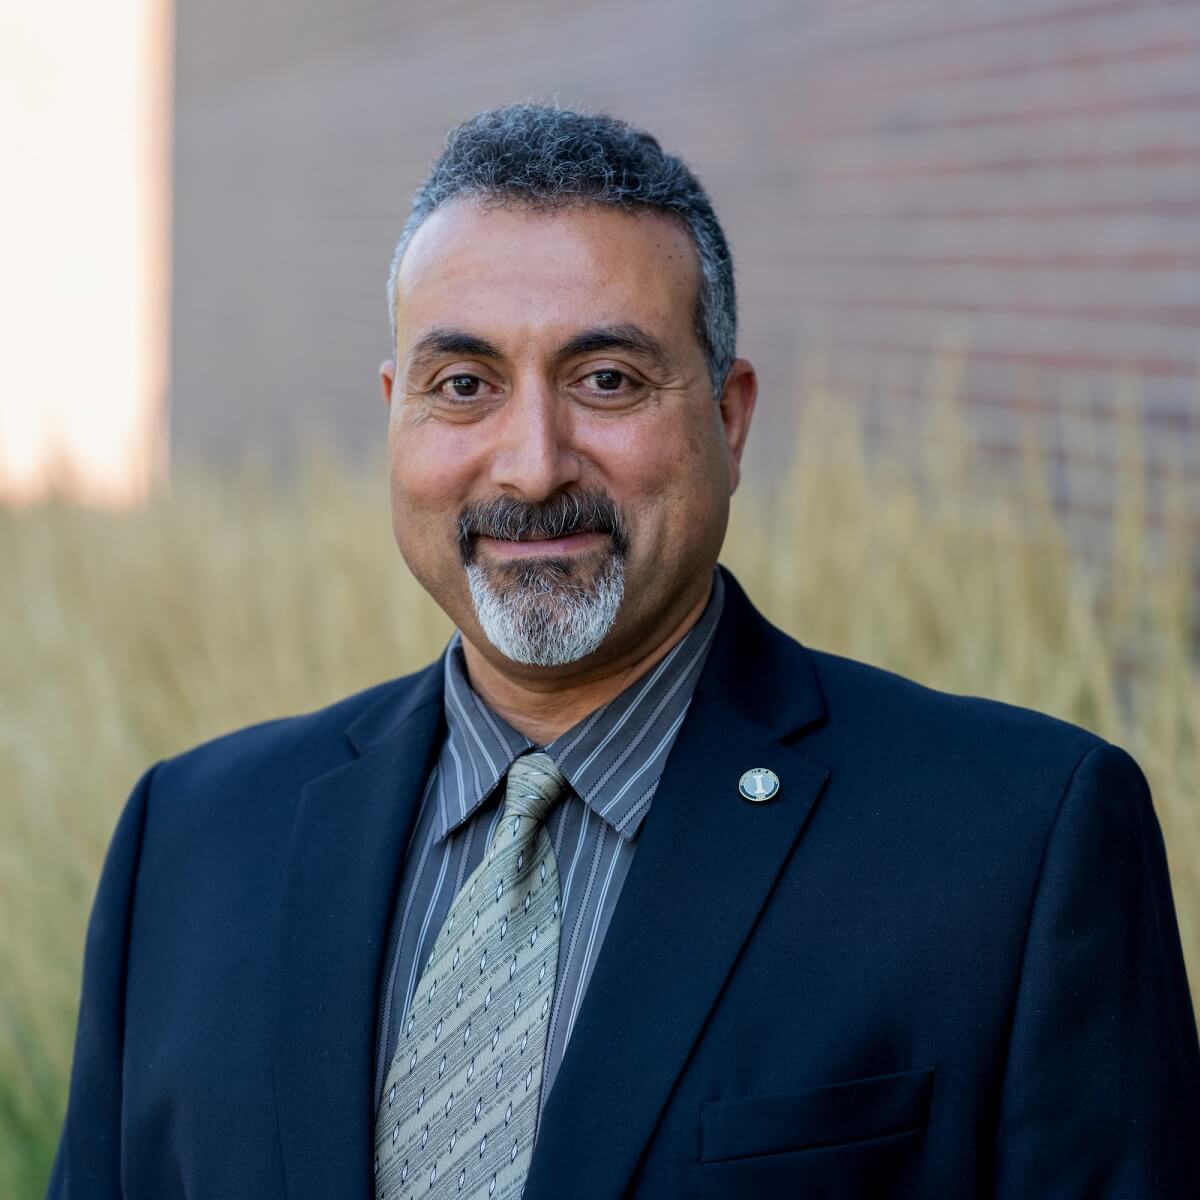 Samir Shahat, Executive Director of Environmental Health and Safety, University Safety Officer, and Radiation Safety Officer